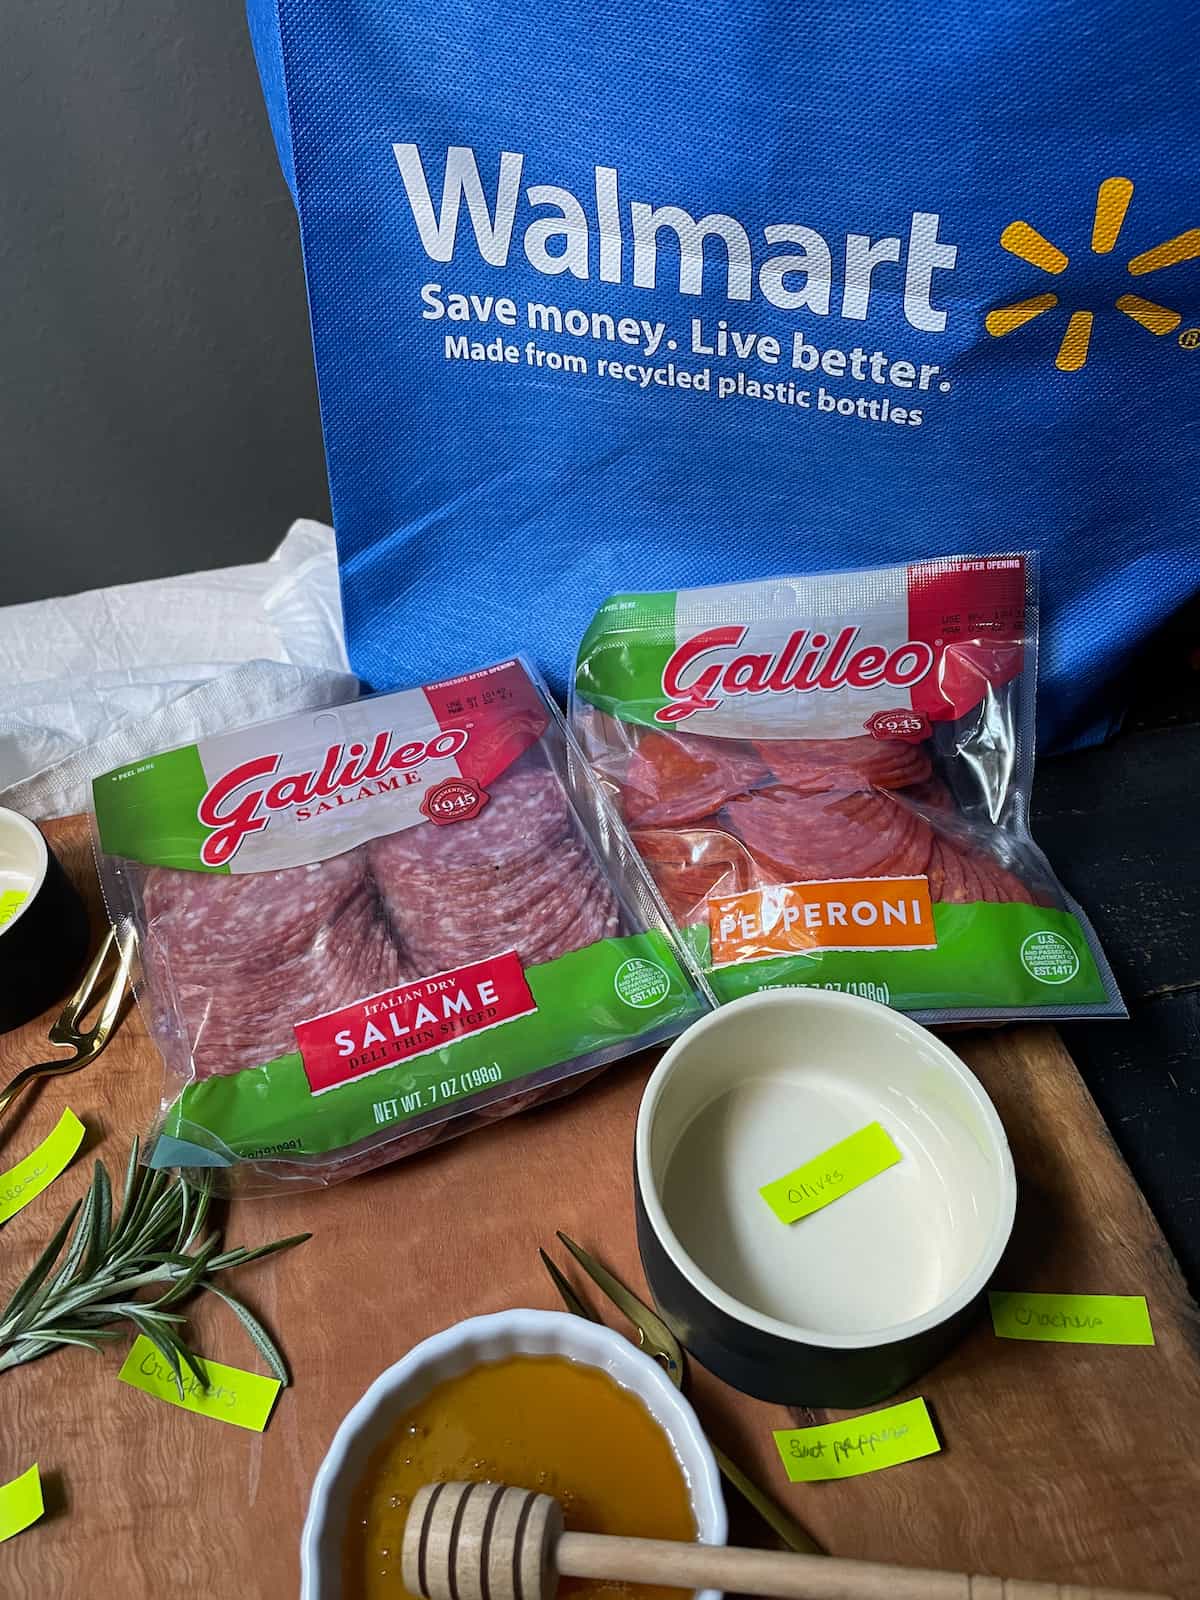 Walmart bag, a package of salame, and a package of pepperoni, bowls marked for extras.